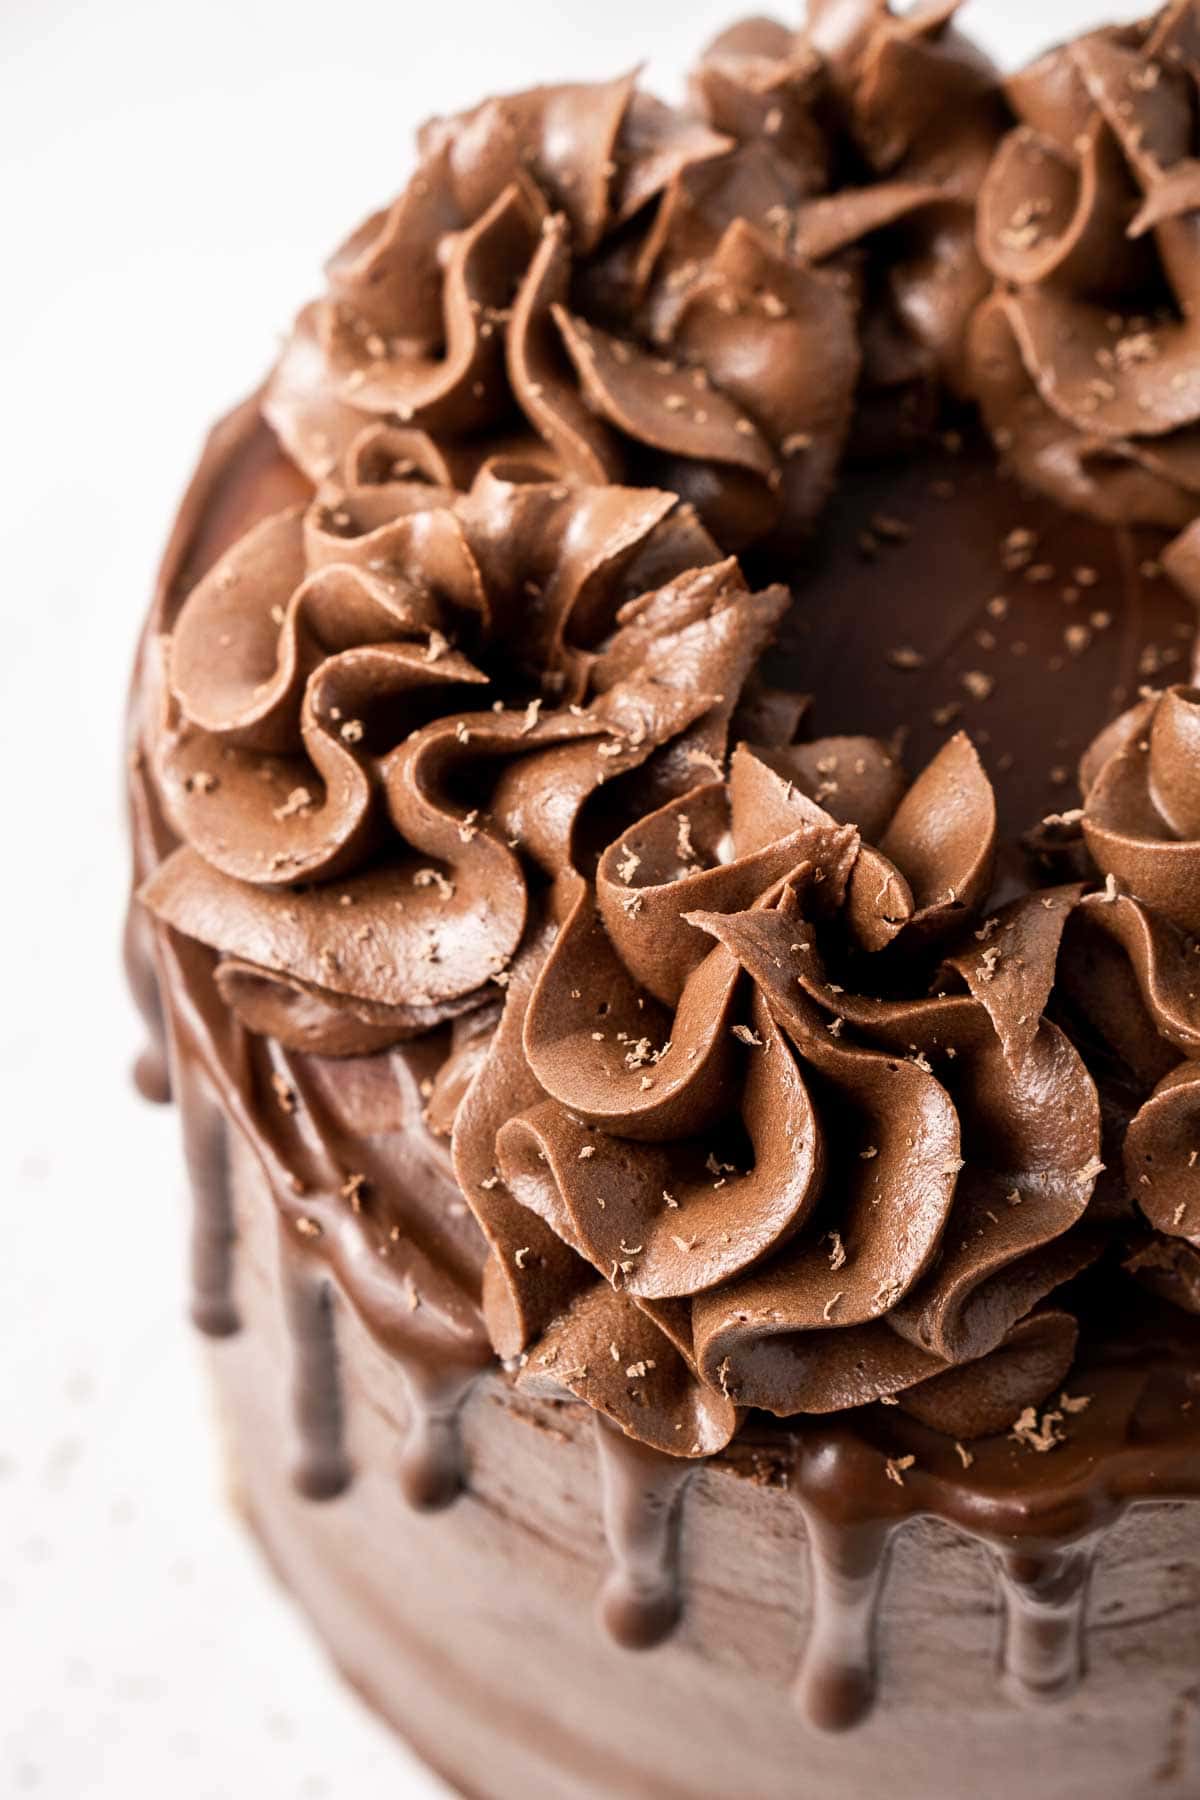 Close up of chocolate buttercream ruffles on top of the cake.